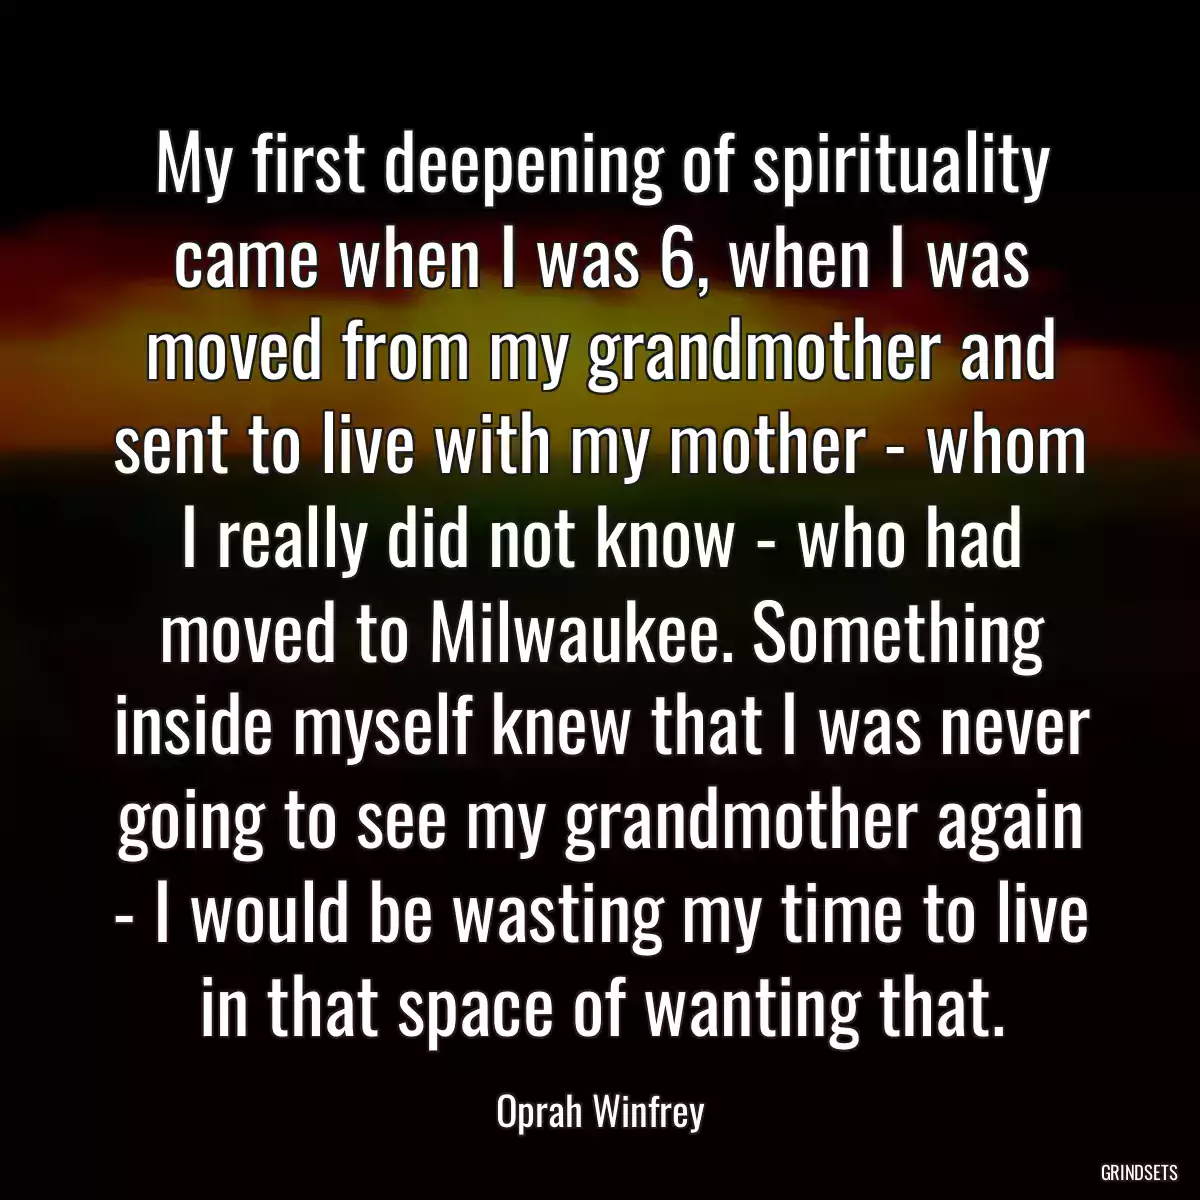 My first deepening of spirituality came when I was 6, when I was moved from my grandmother and sent to live with my mother - whom I really did not know - who had moved to Milwaukee. Something inside myself knew that I was never going to see my grandmother again - I would be wasting my time to live in that space of wanting that.